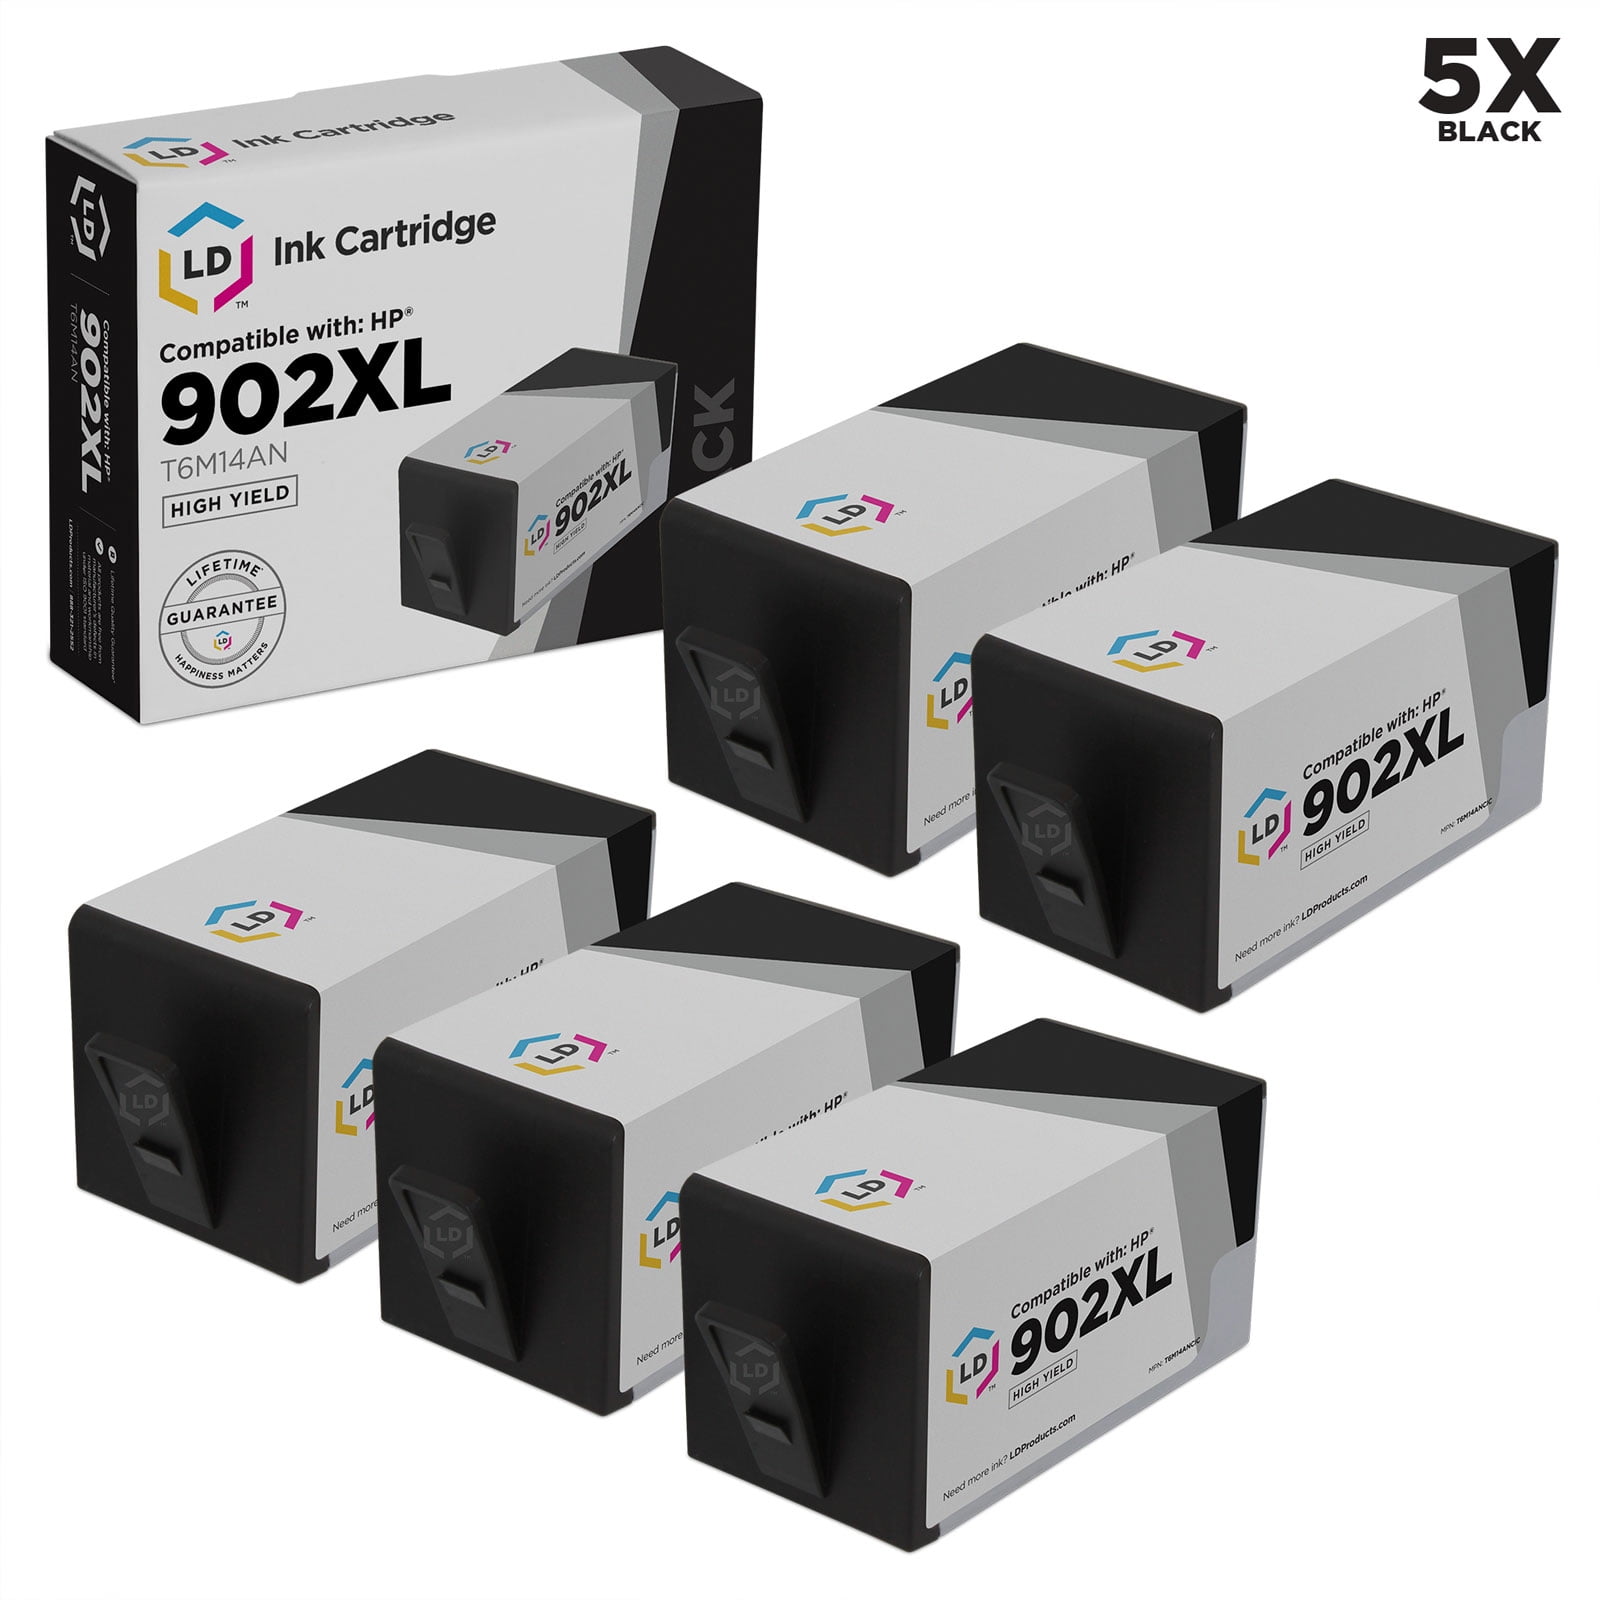 Black to use with OfficeJet 6950 6954 6979 & OfficeJet Pro 6960 6968 6970 6975 6978 LD Compatible Ink Cartridge Replacement for HP 902XL 902 XL T6M14AN High Yield 